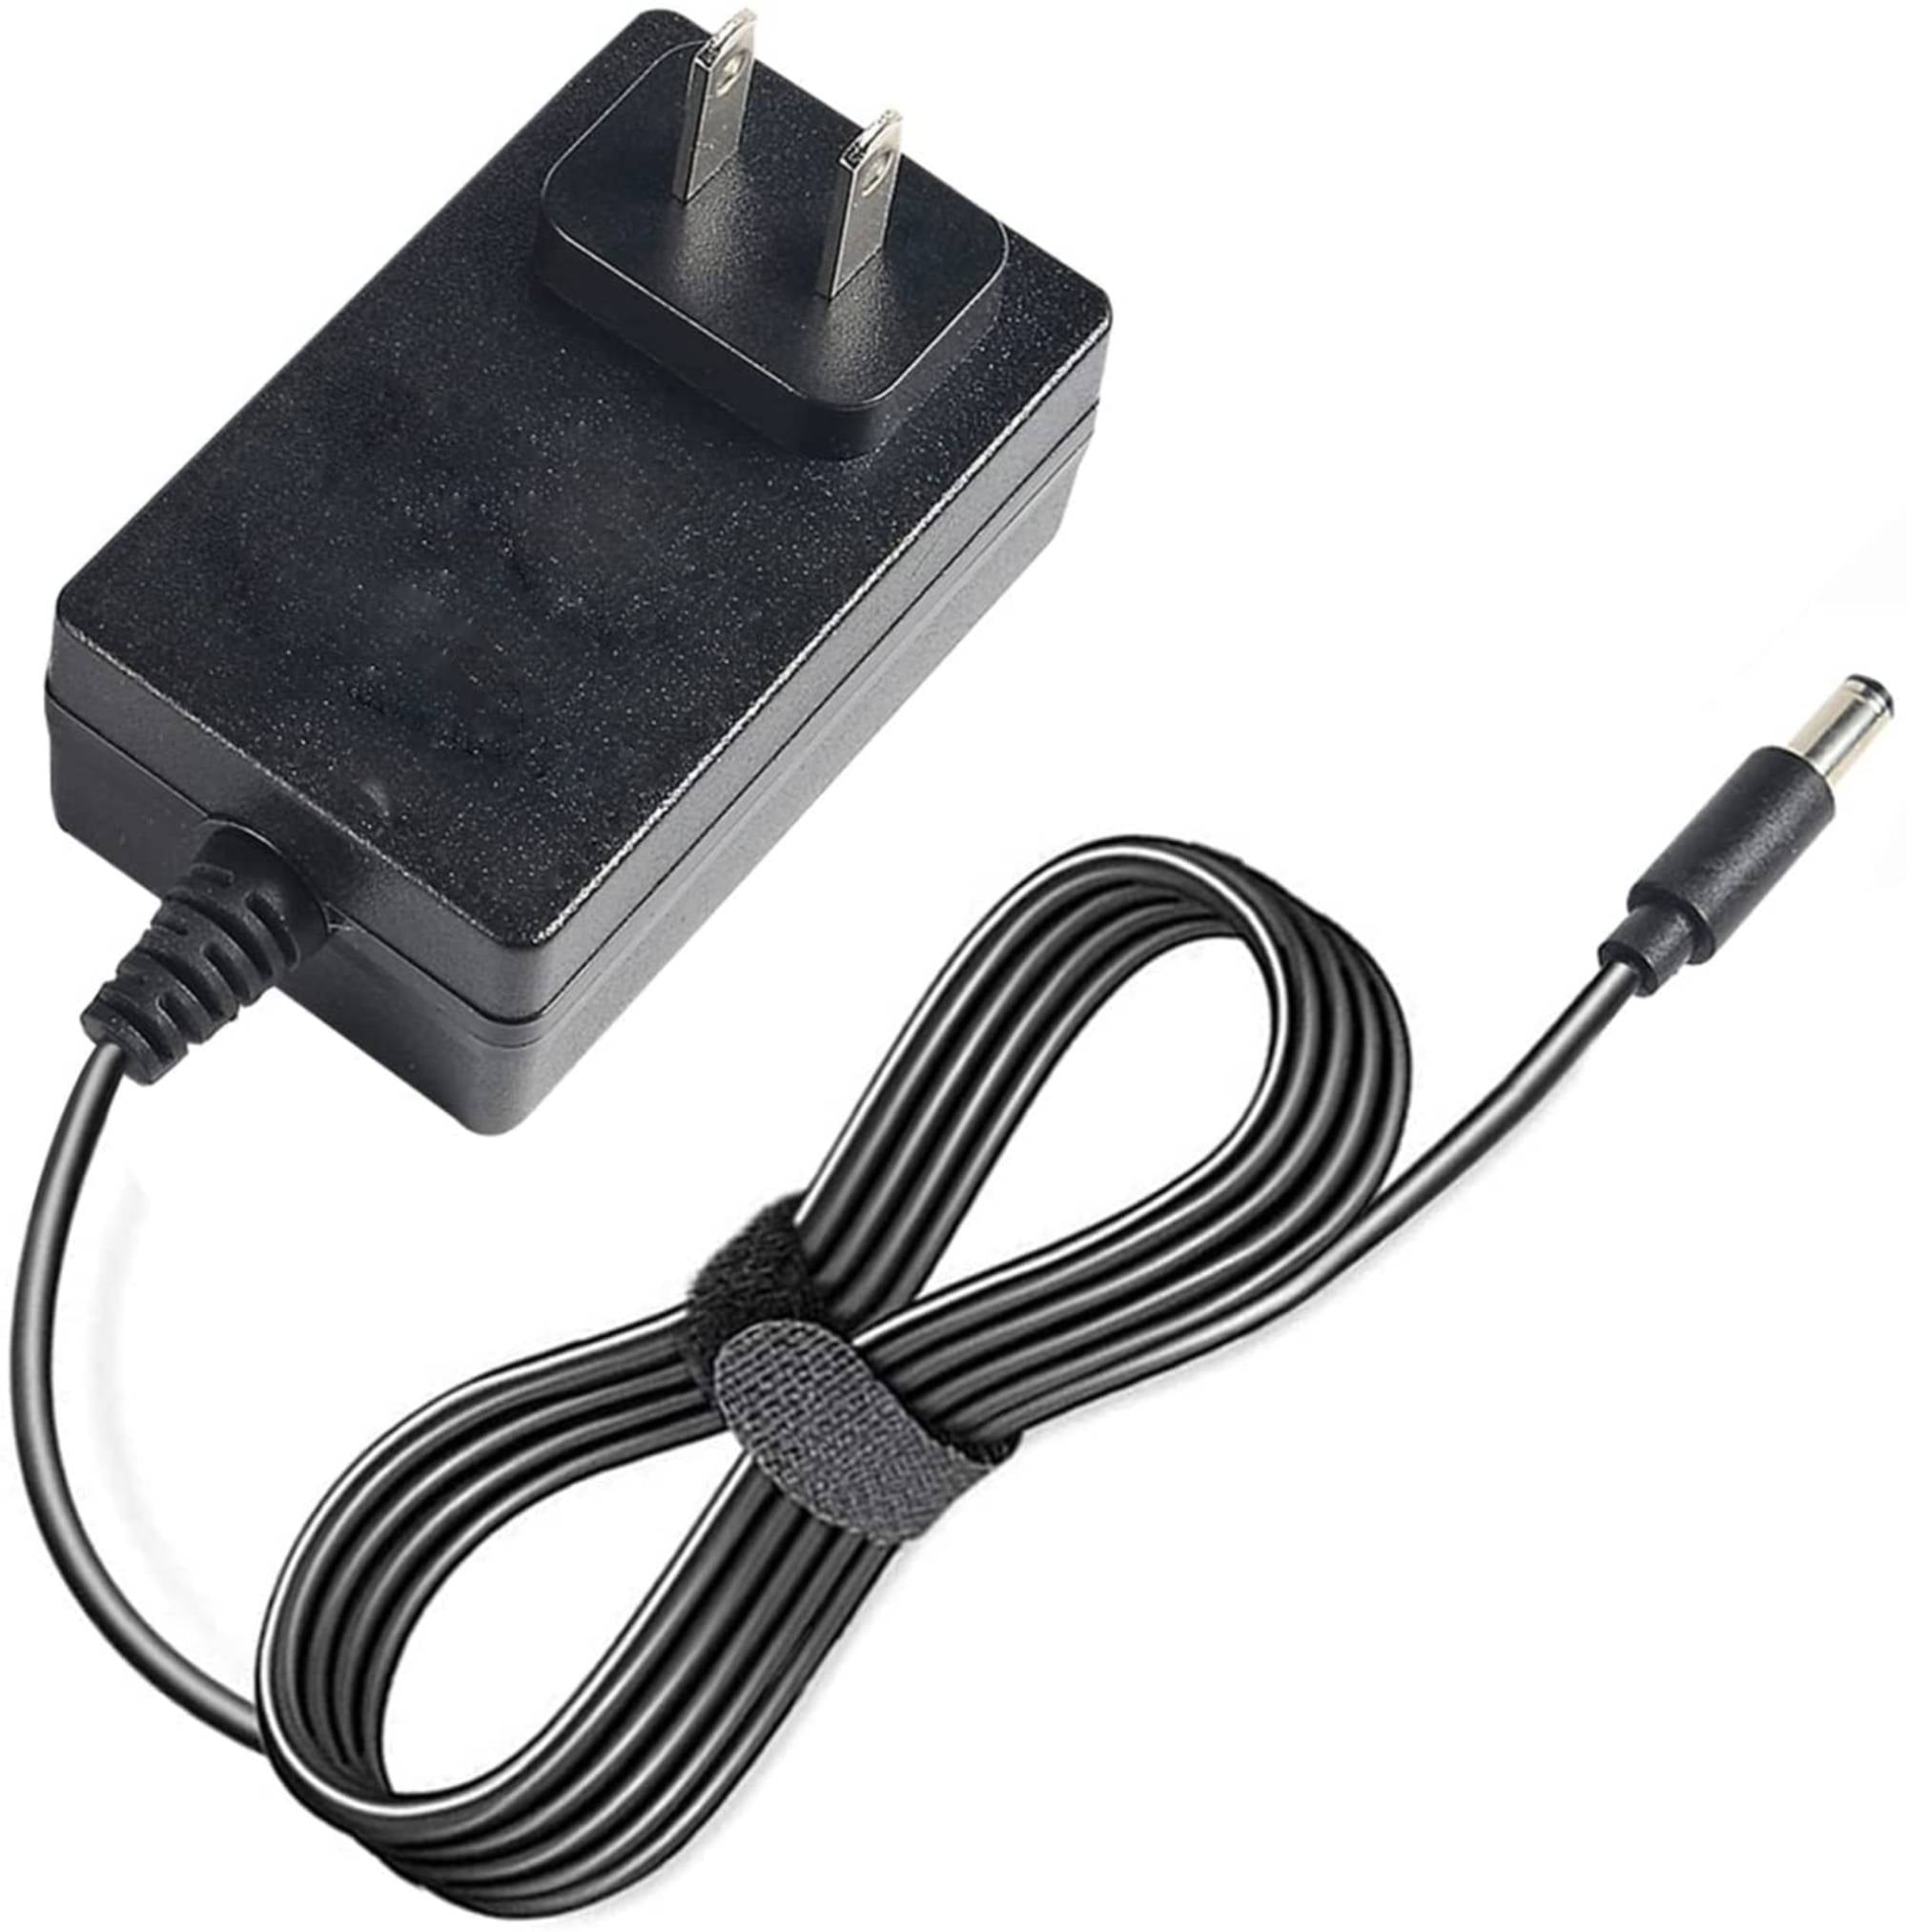 AC Adapter for Tech Model STD-12030/P STD-12030P Charger Switching Power Supply 